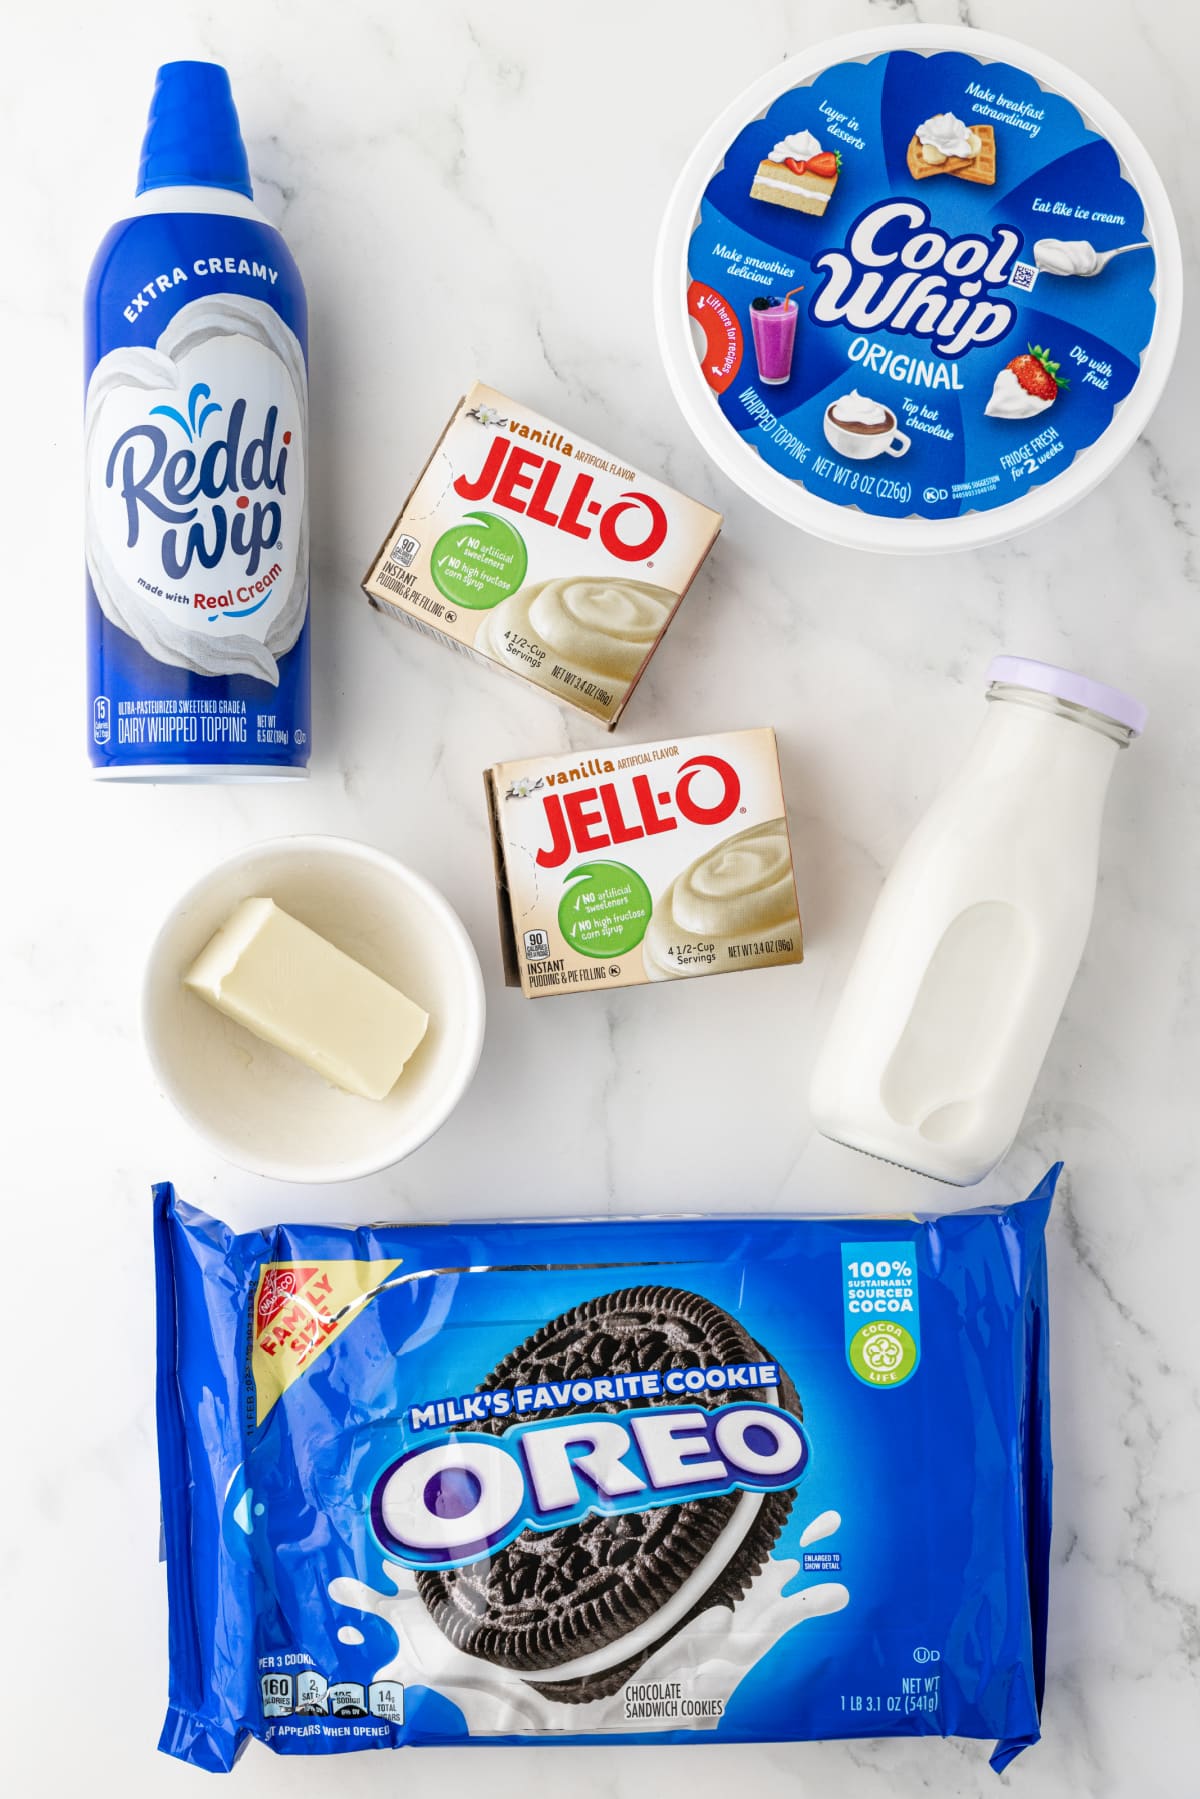 reddi whip, jell-o packets, cool whip and a box of Oreo cookies on a white countertop